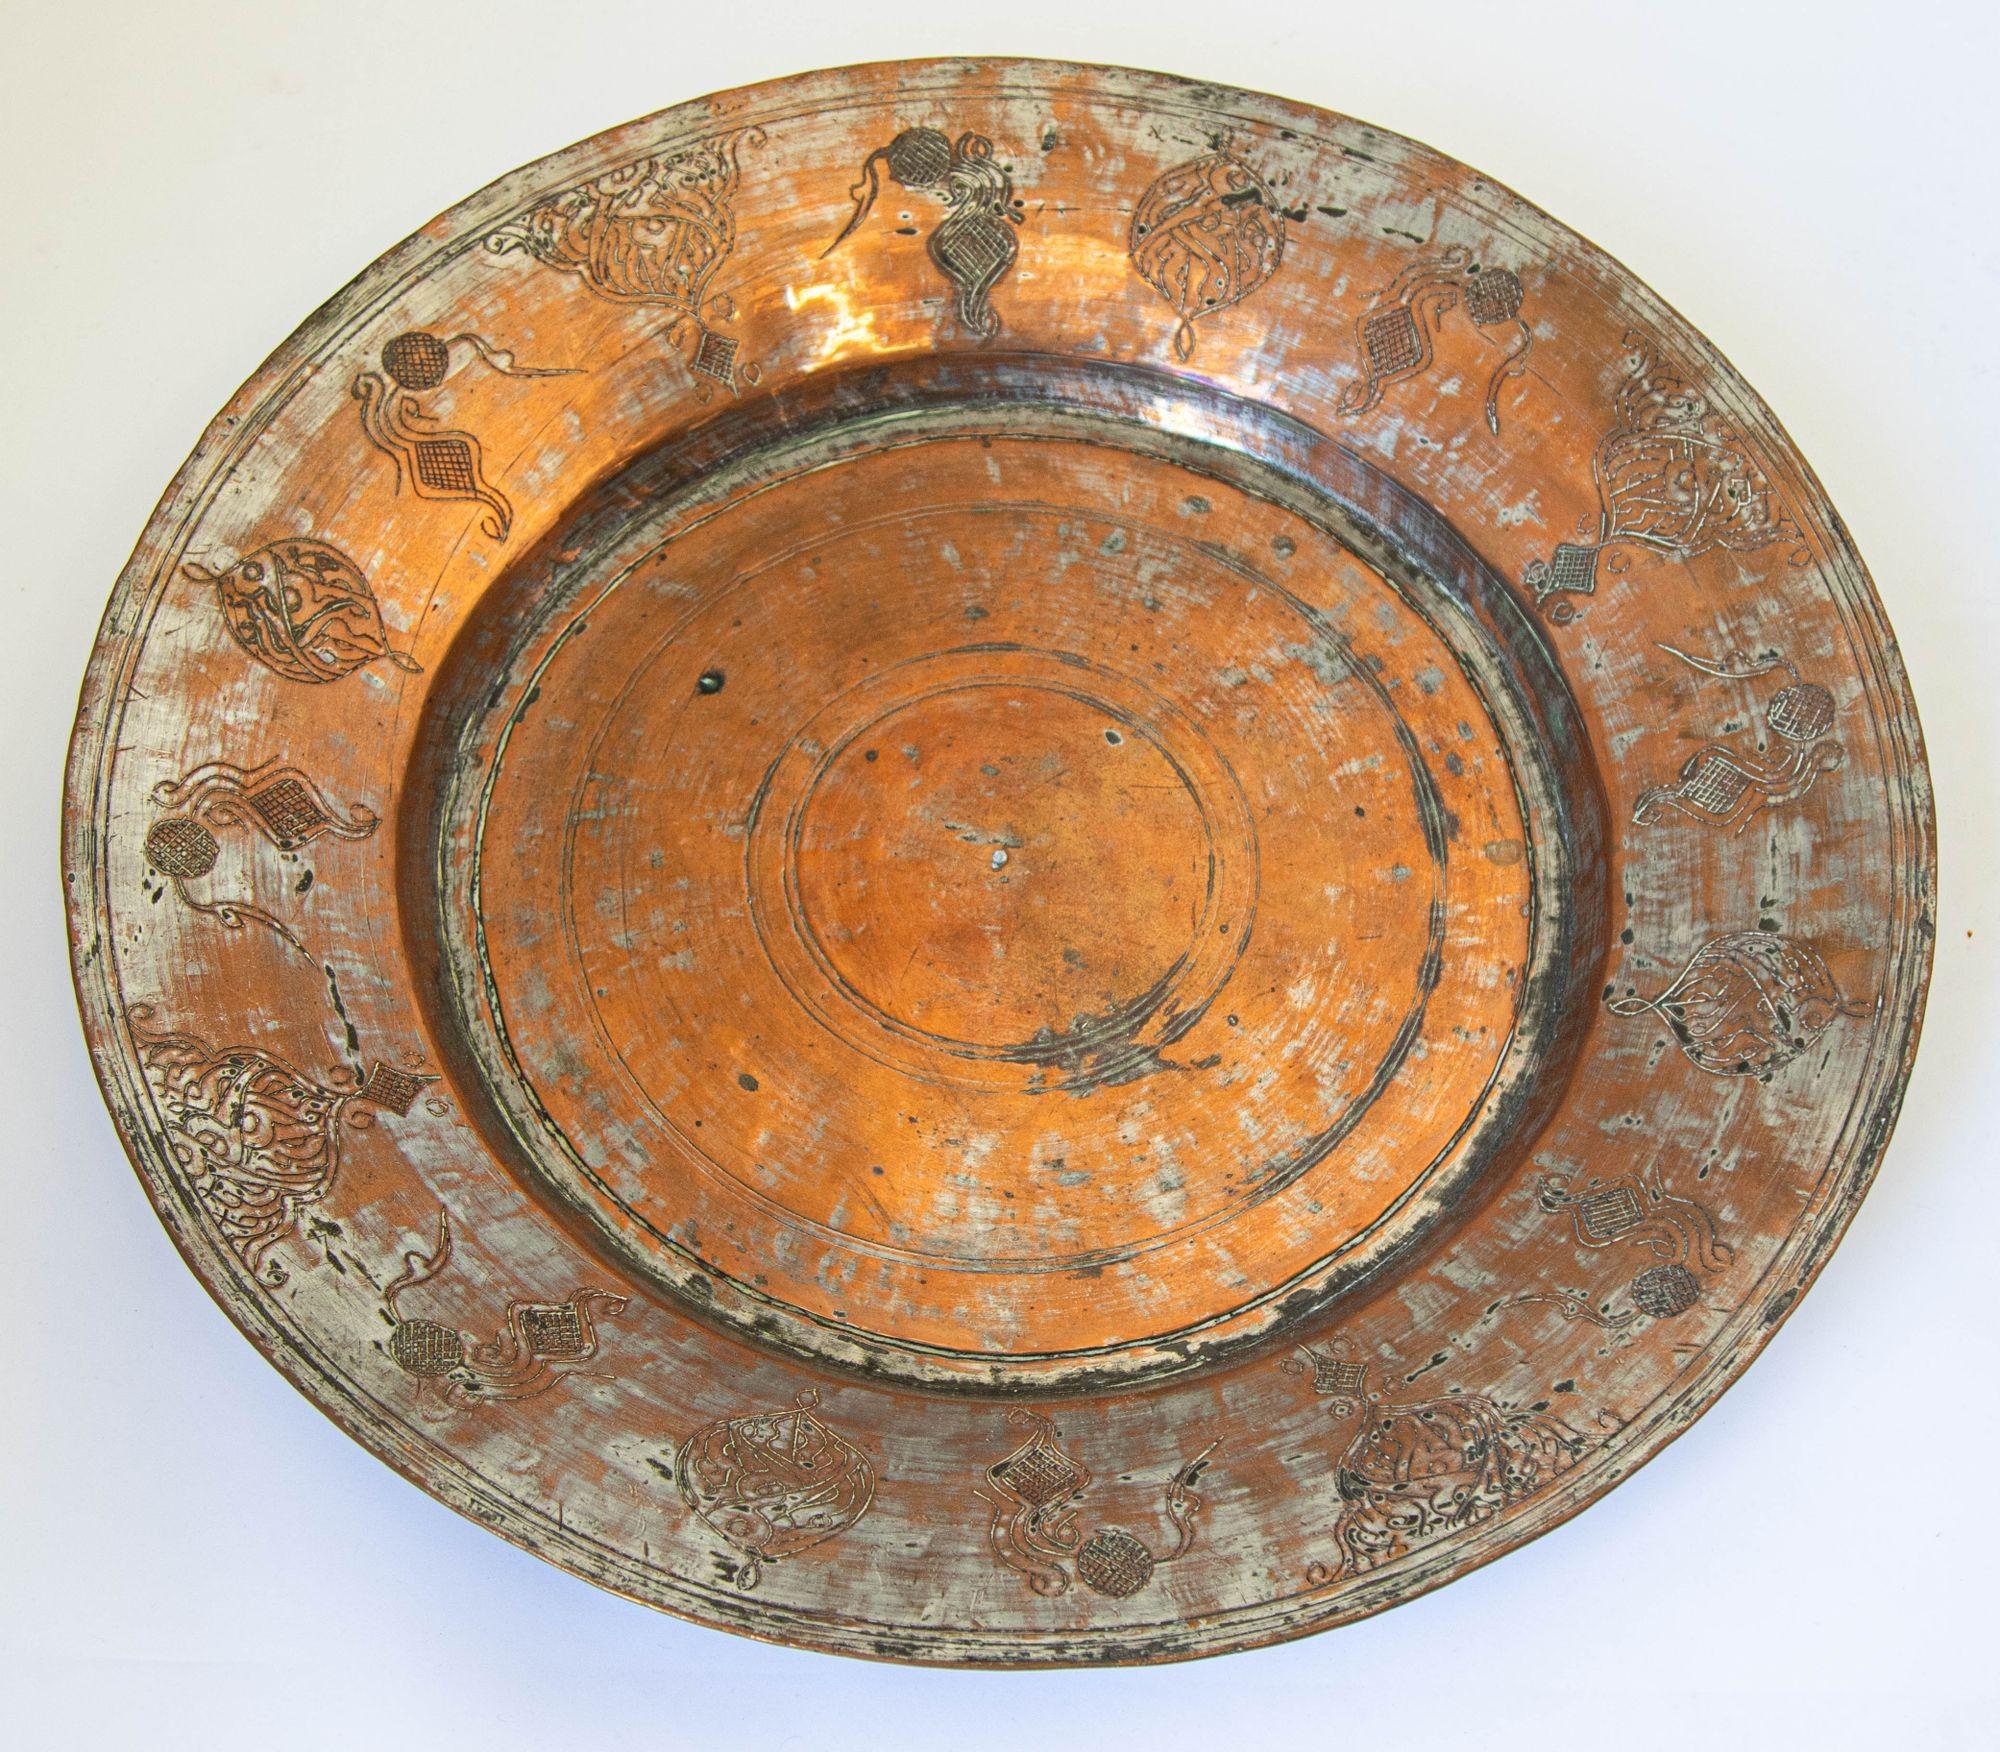 Large Antique Tinned Copper Rajasthani Vessel Bowl 12